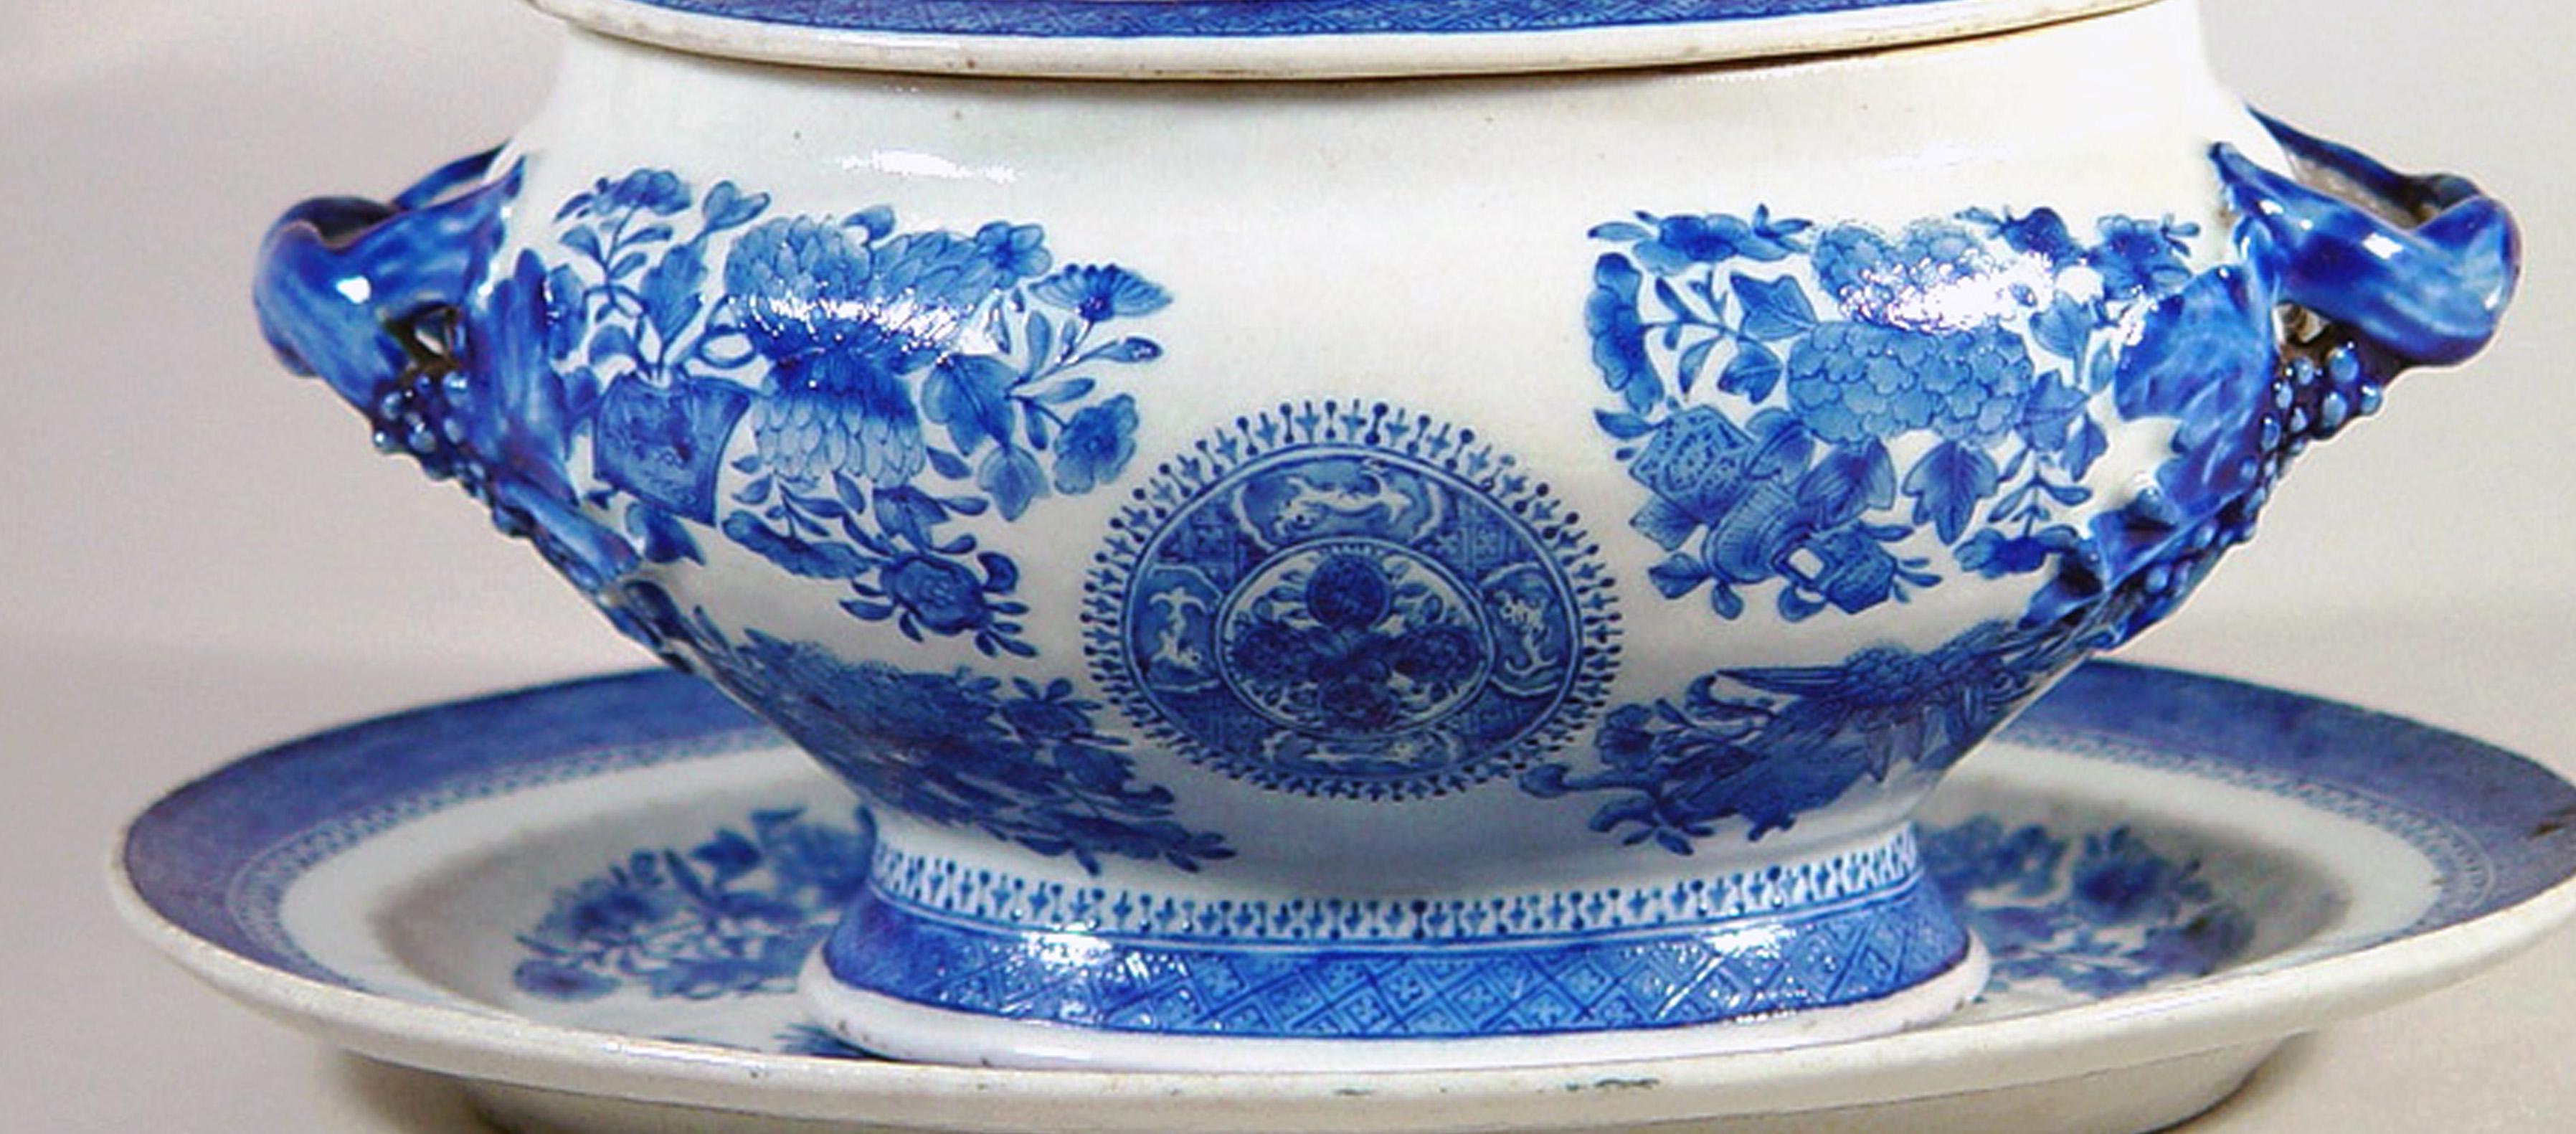 Chinese Export blue enamel Fitzhugh porcelain sauce tureen, cover and stand,
circa 1810.

The Chinese Export tureen is of an oval footed form with a dark blue floral knop and strap handles. The tureen, cover and stand are decorated in the